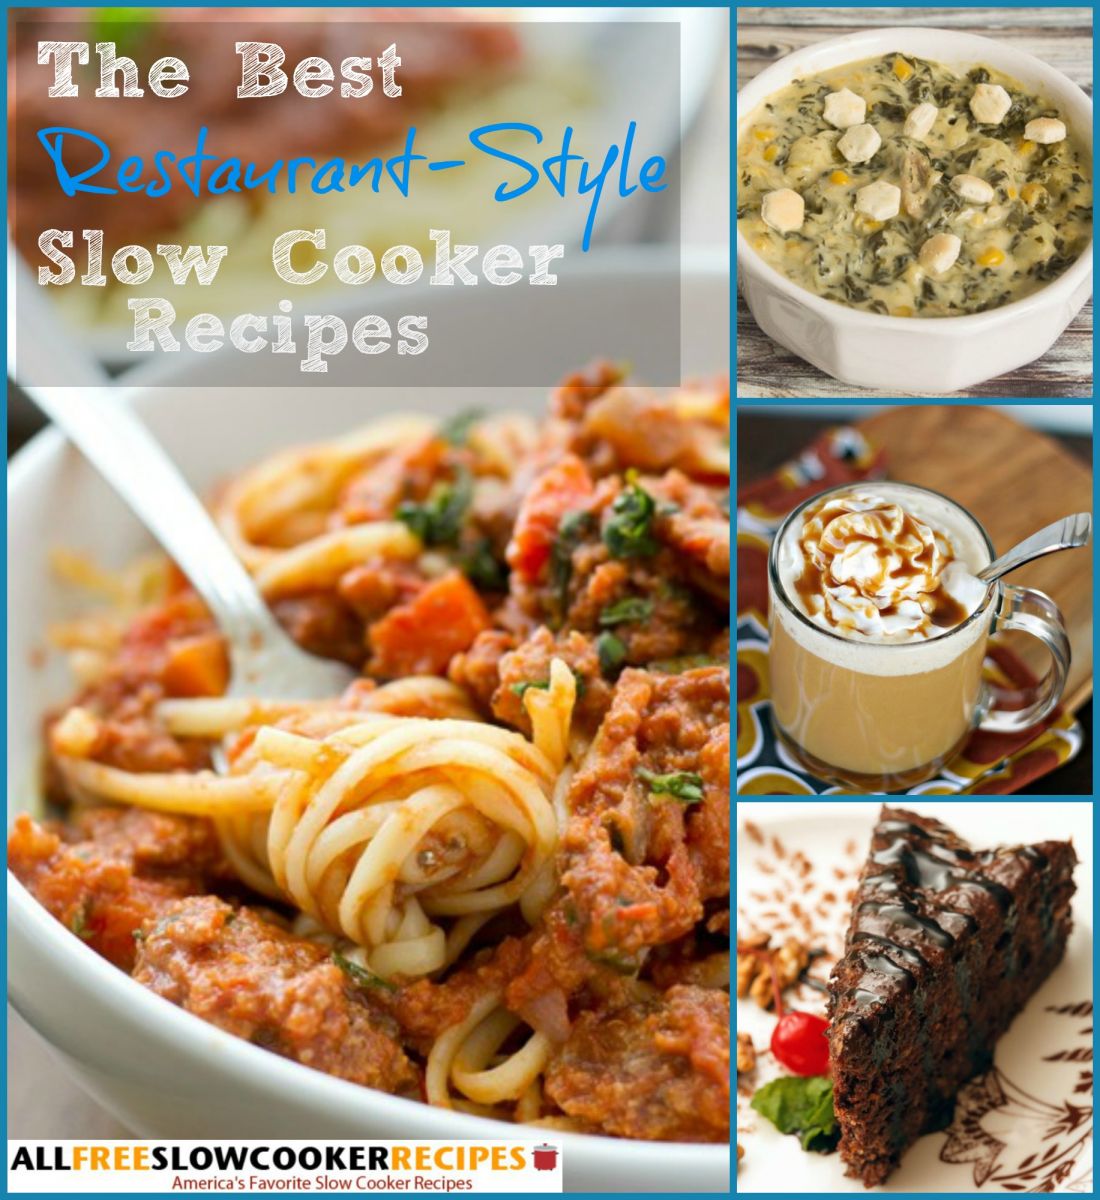 Slow-Cooker Recipes - Recipes by Cooking Style